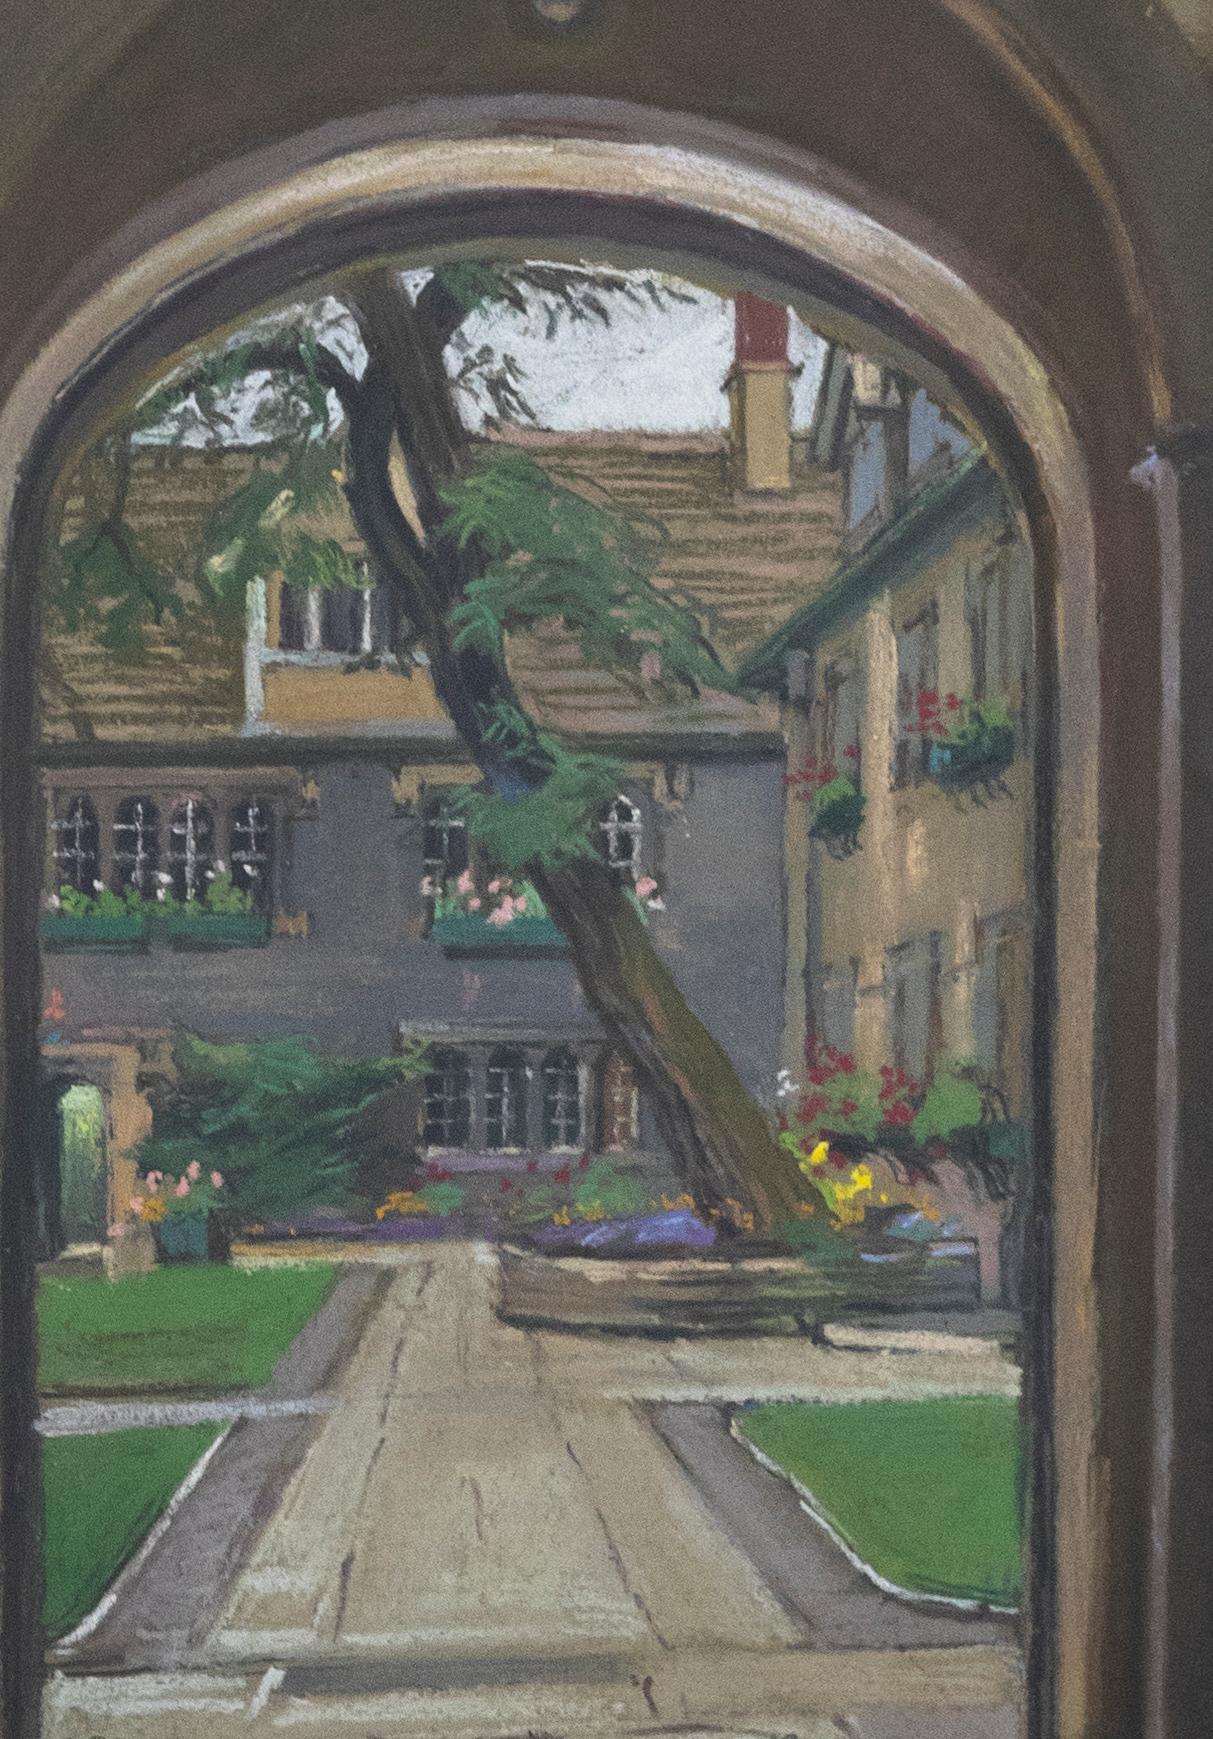 A fine pastel drawing of St Edmund Hall, Oxford, viewed through a beautiful stone archway. The courtyard garden looks full with summer colour, planted out with bright annuals that draw the eye. The artwork has been indistinctly signed to the lower